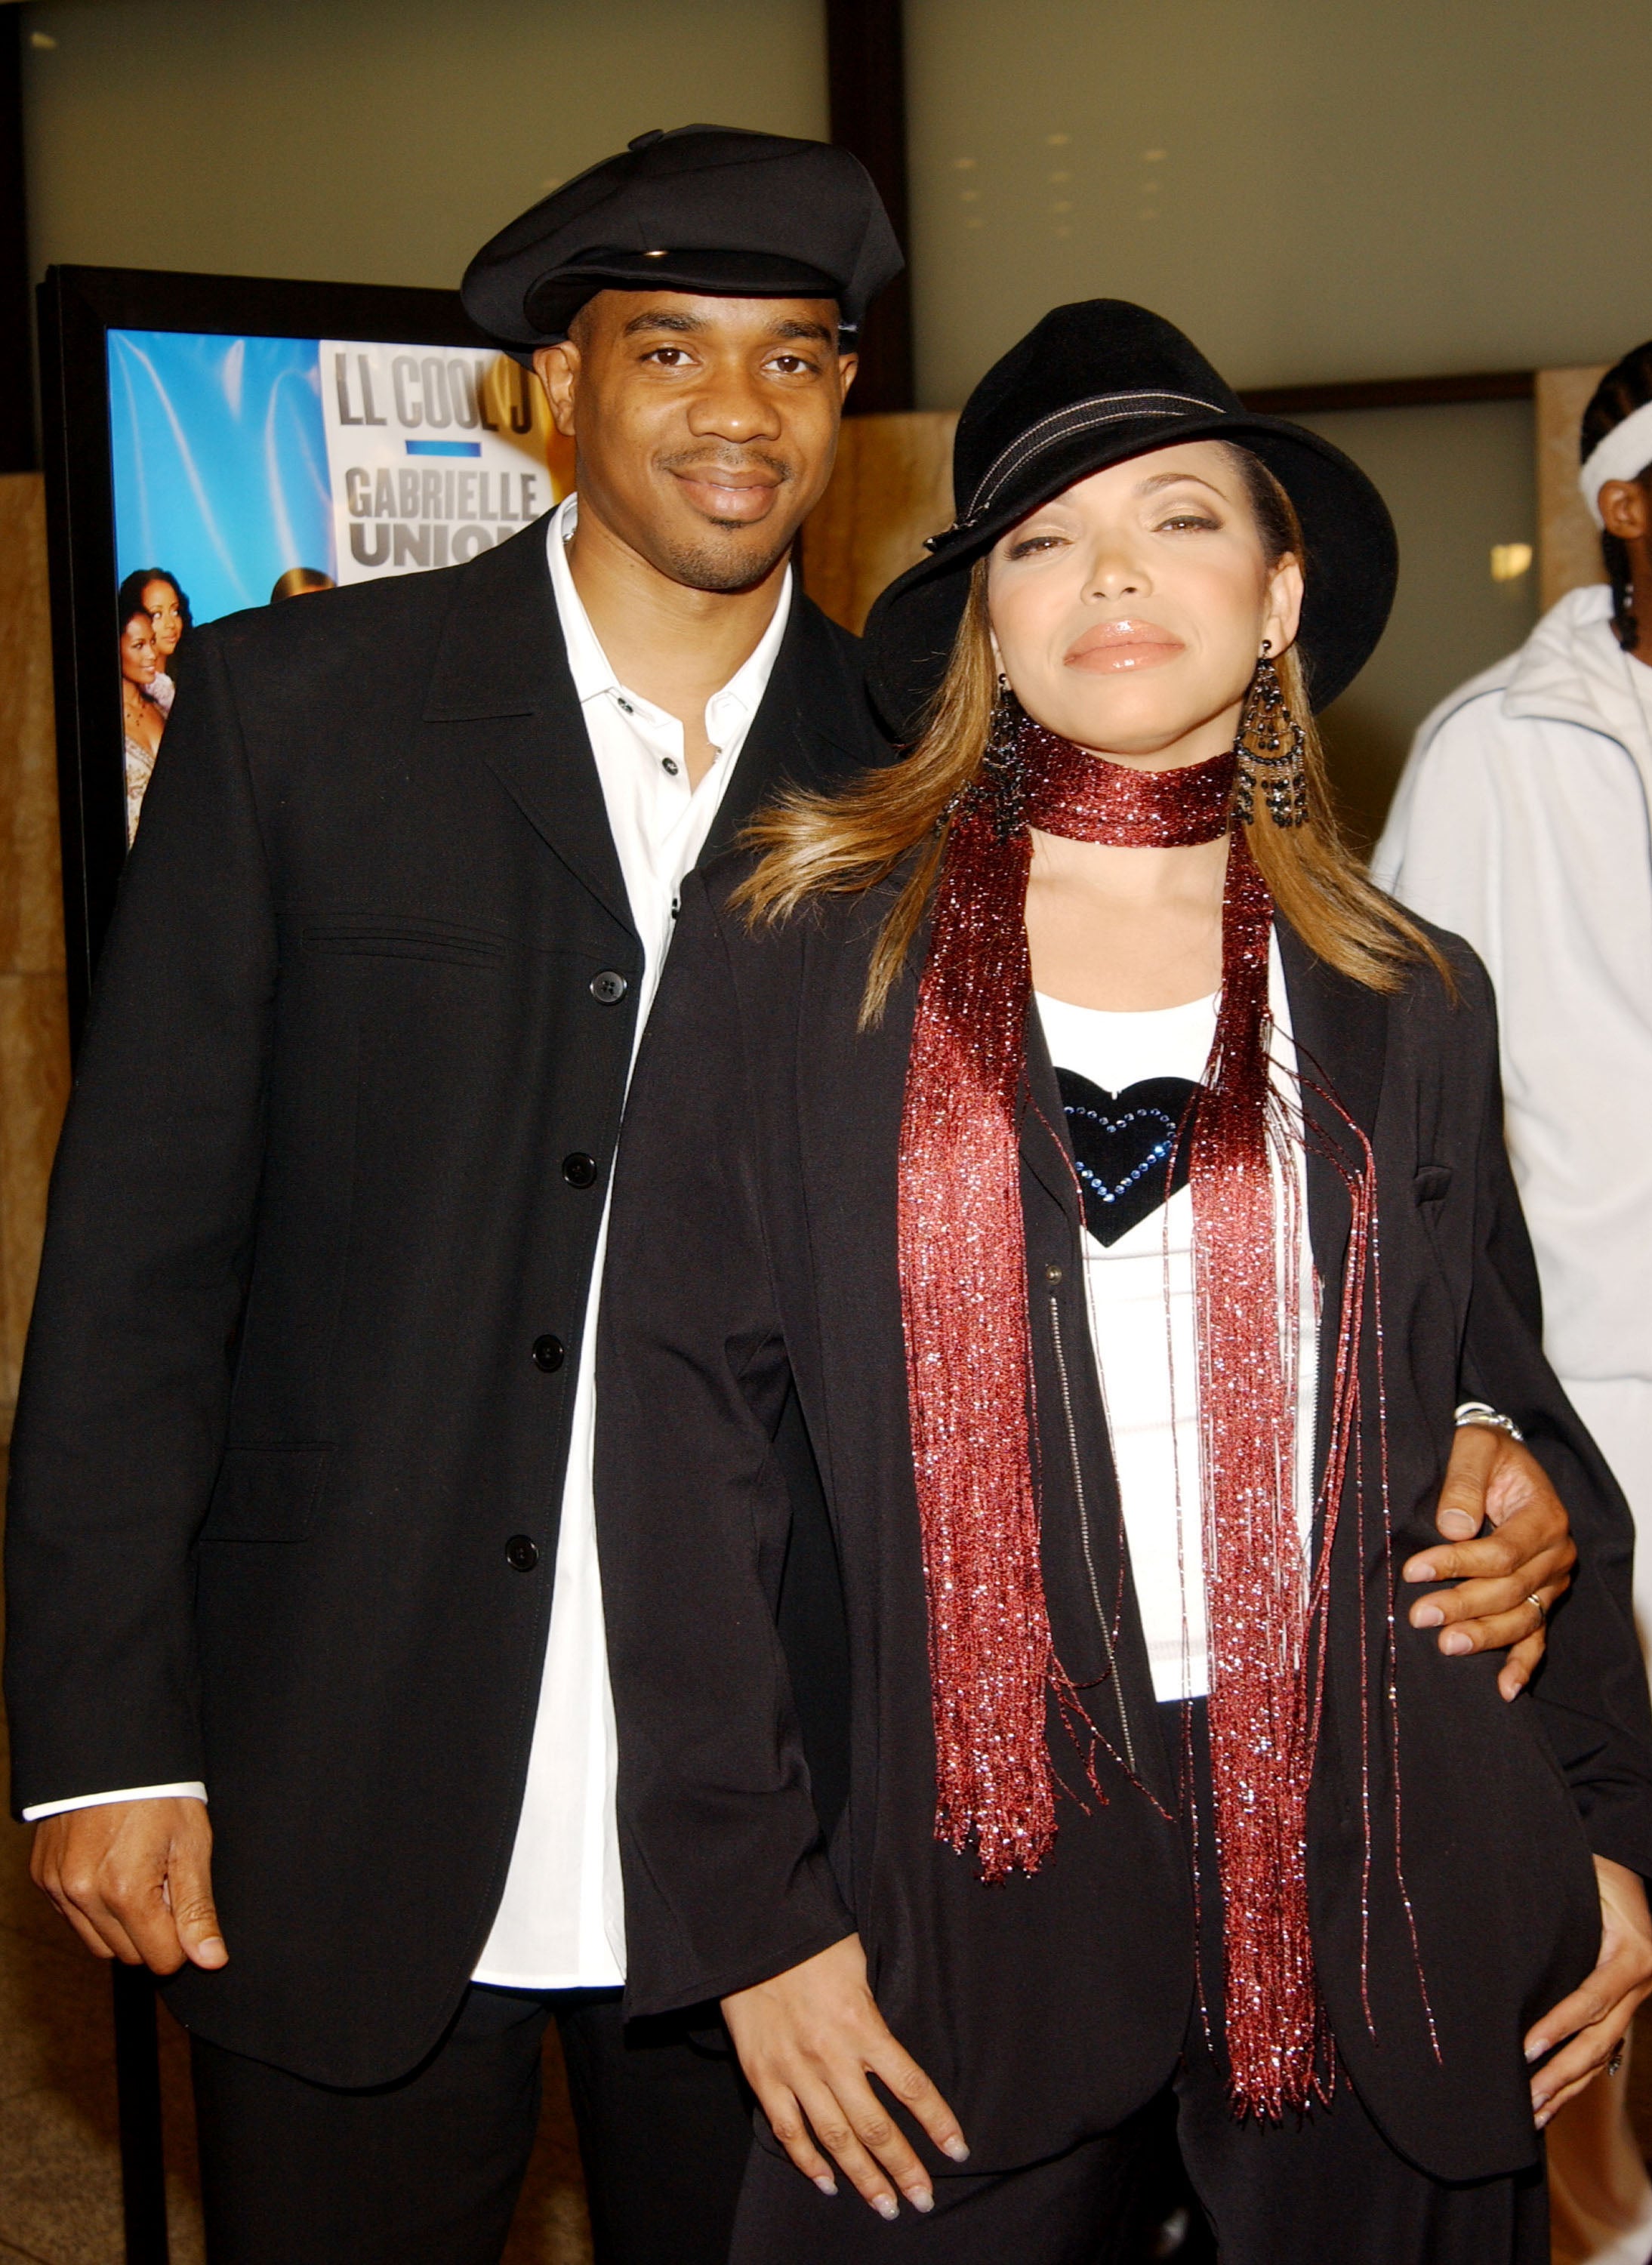 Tisha Campbell and Duane Martin Show Us What Being Happily Married for 20 Years Looks Like
